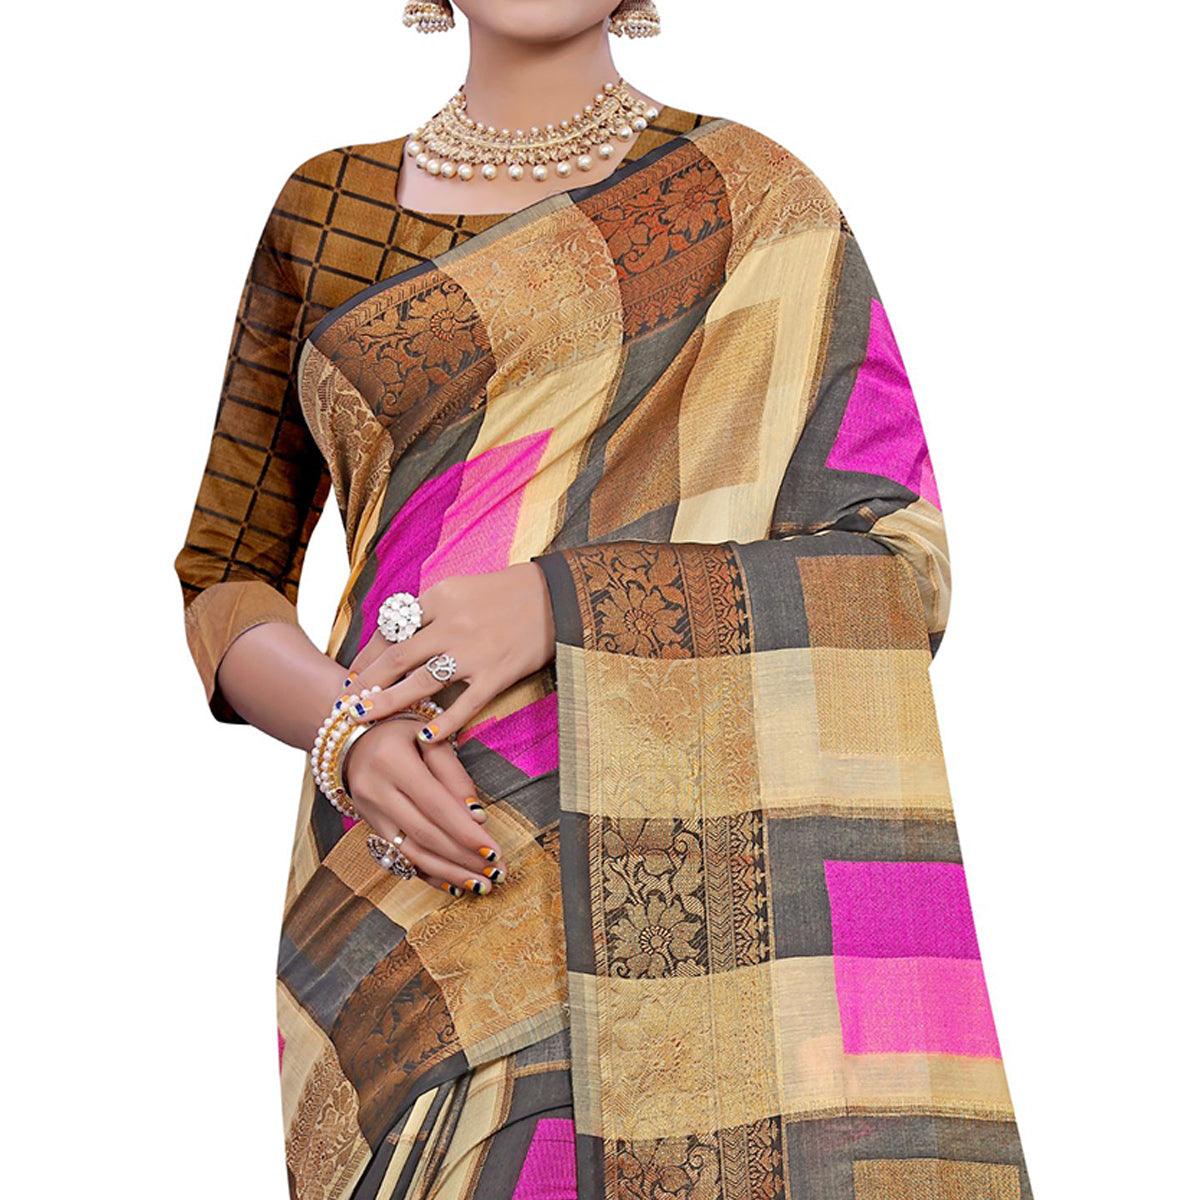 Lovely Beige-Pink Colored Casual Printed Pure Cotton Jacquard Saree - Peachmode